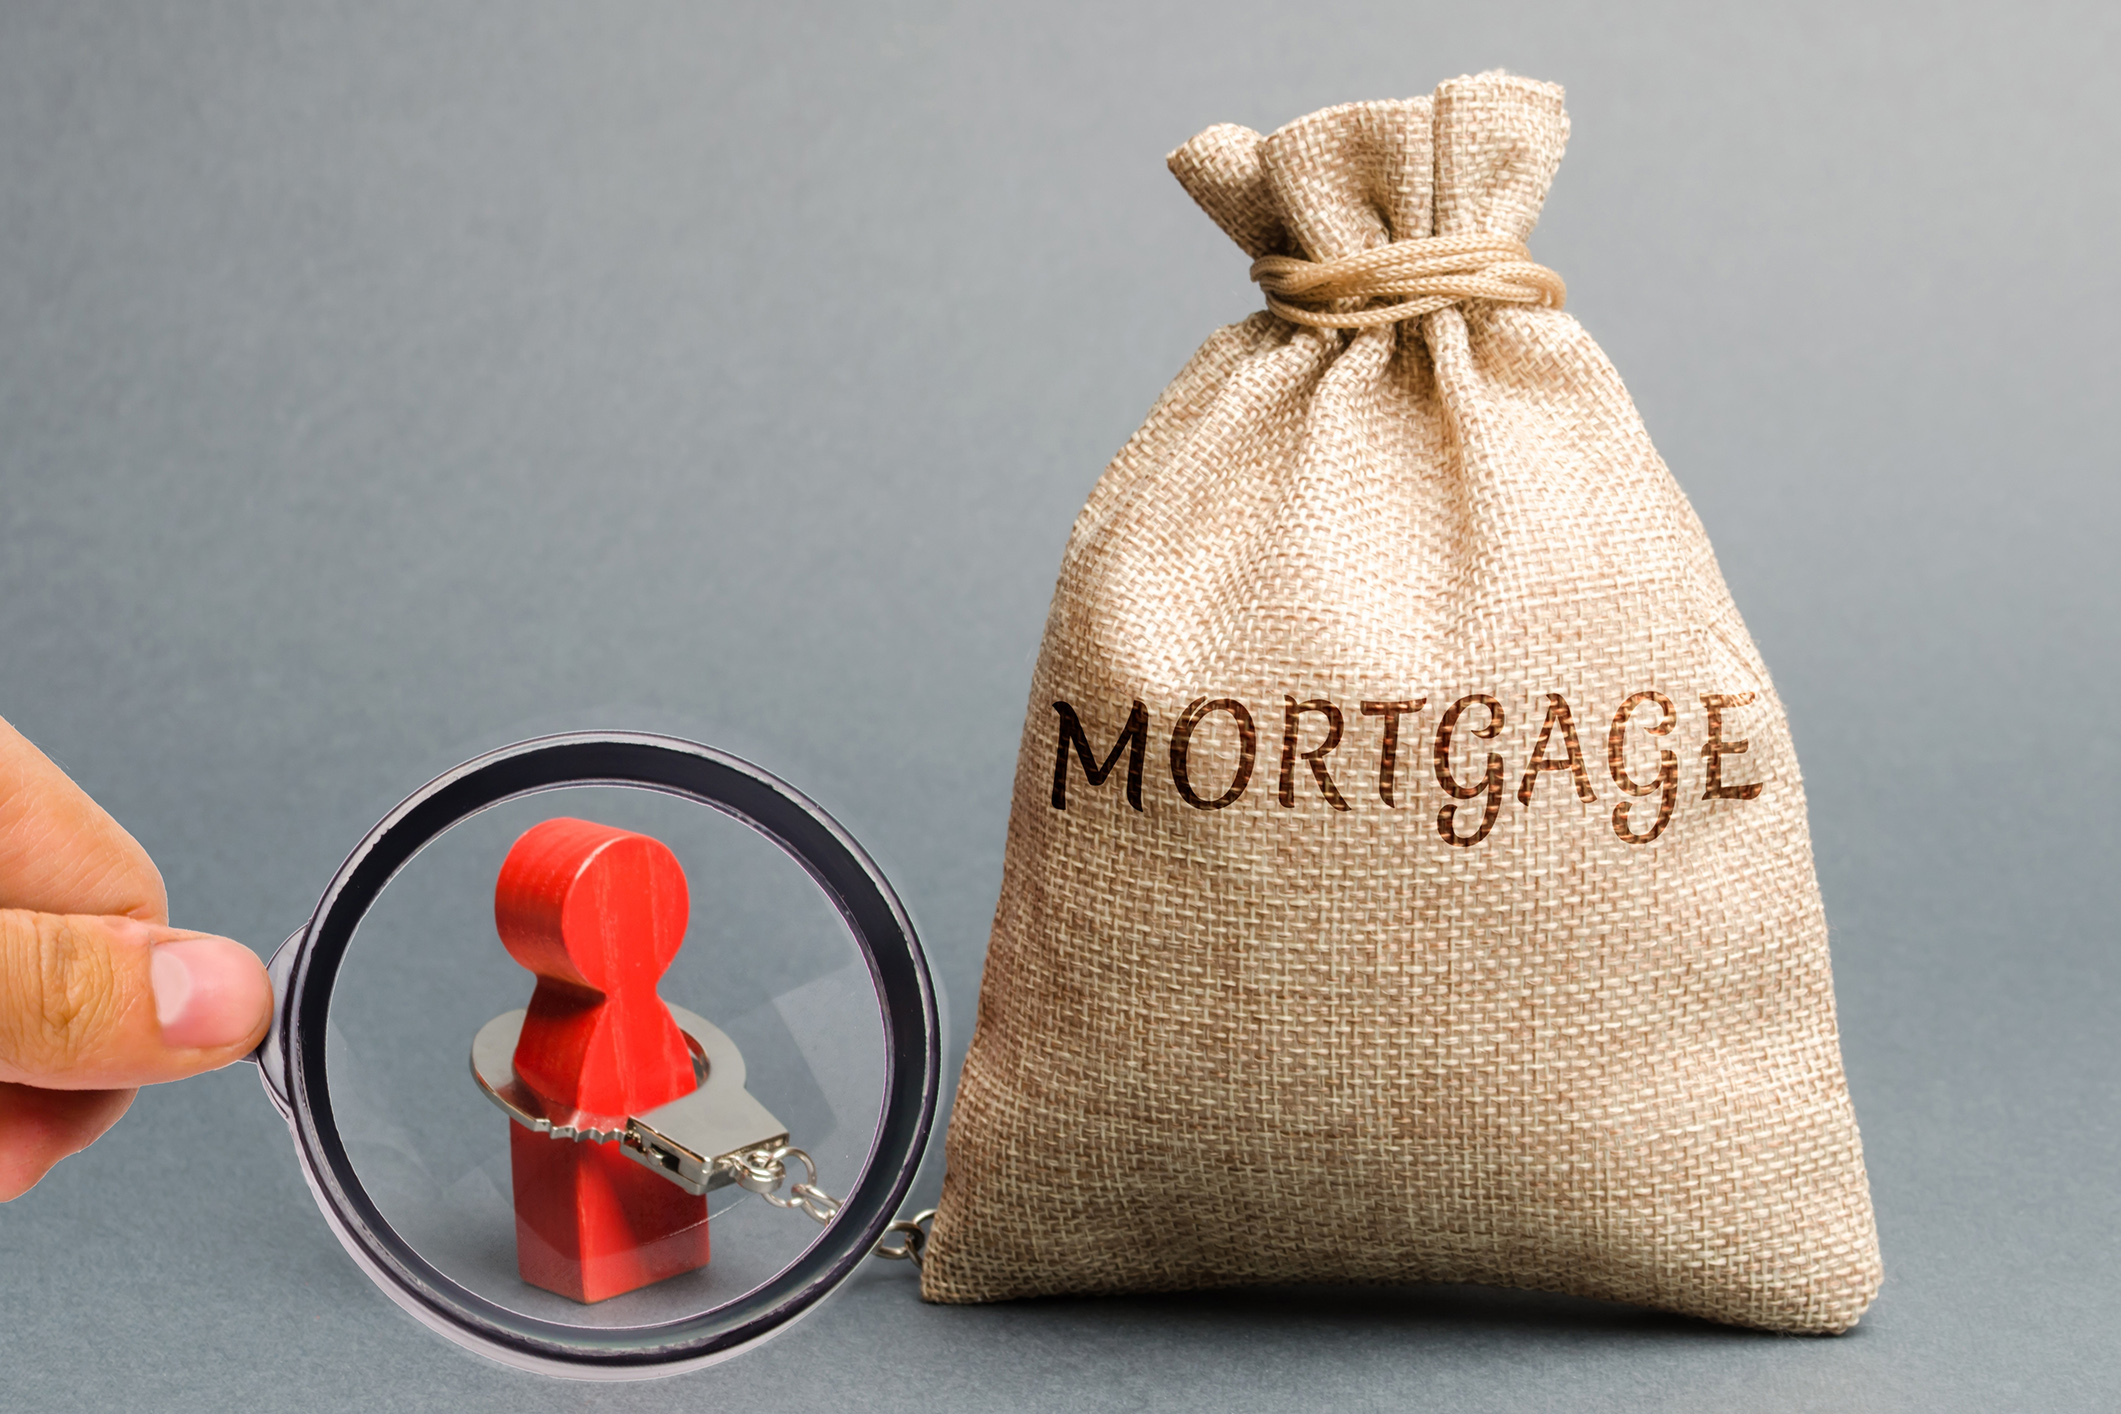 Best Mortgage Rate: How To Attain the Best Home Loan Rate Tips